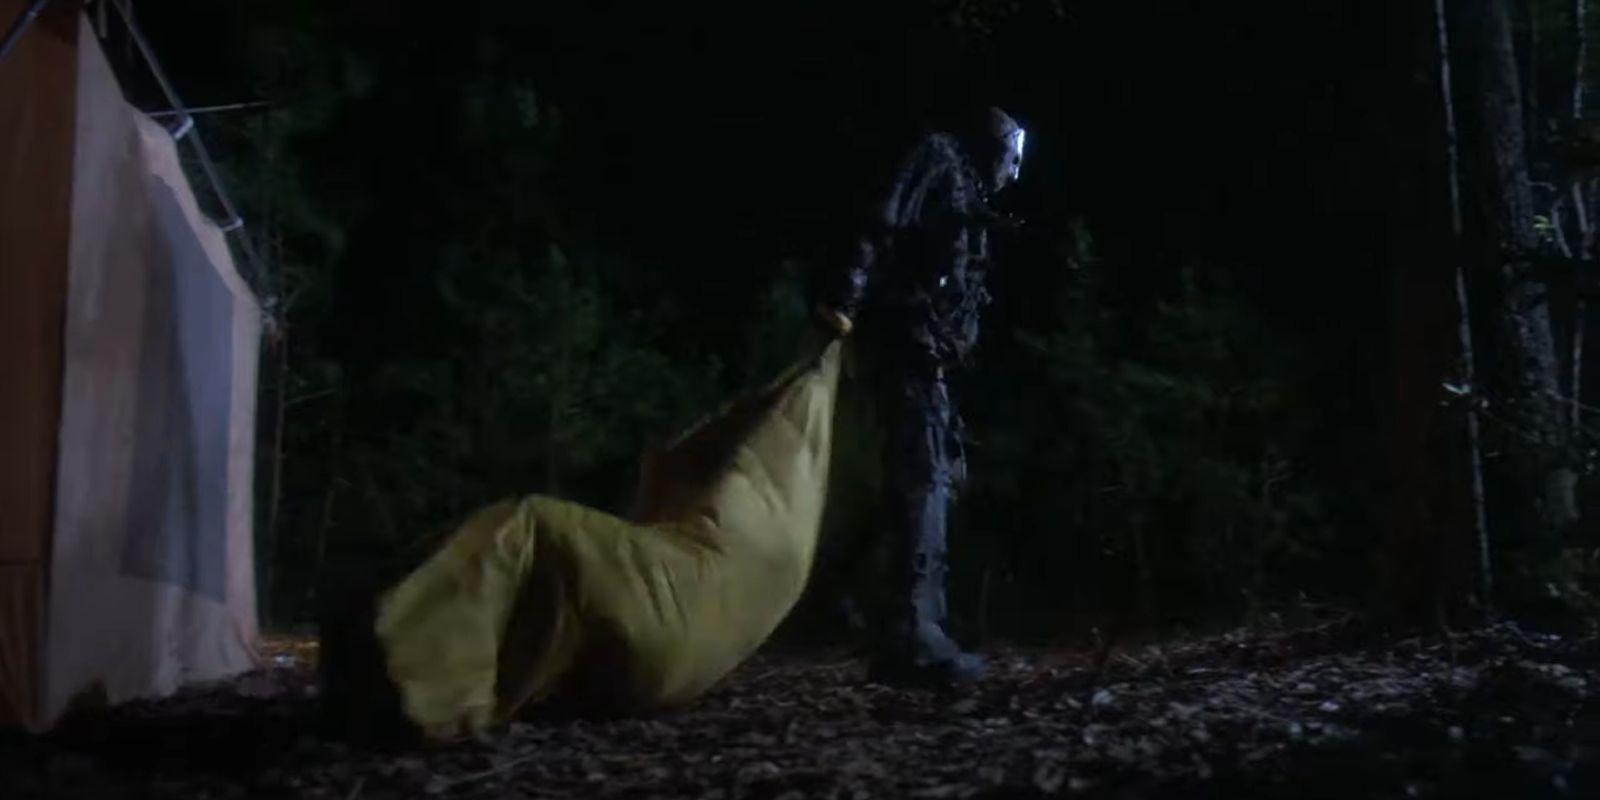 Jason drags victim inside a sleeping bag in The New Blood before killing her